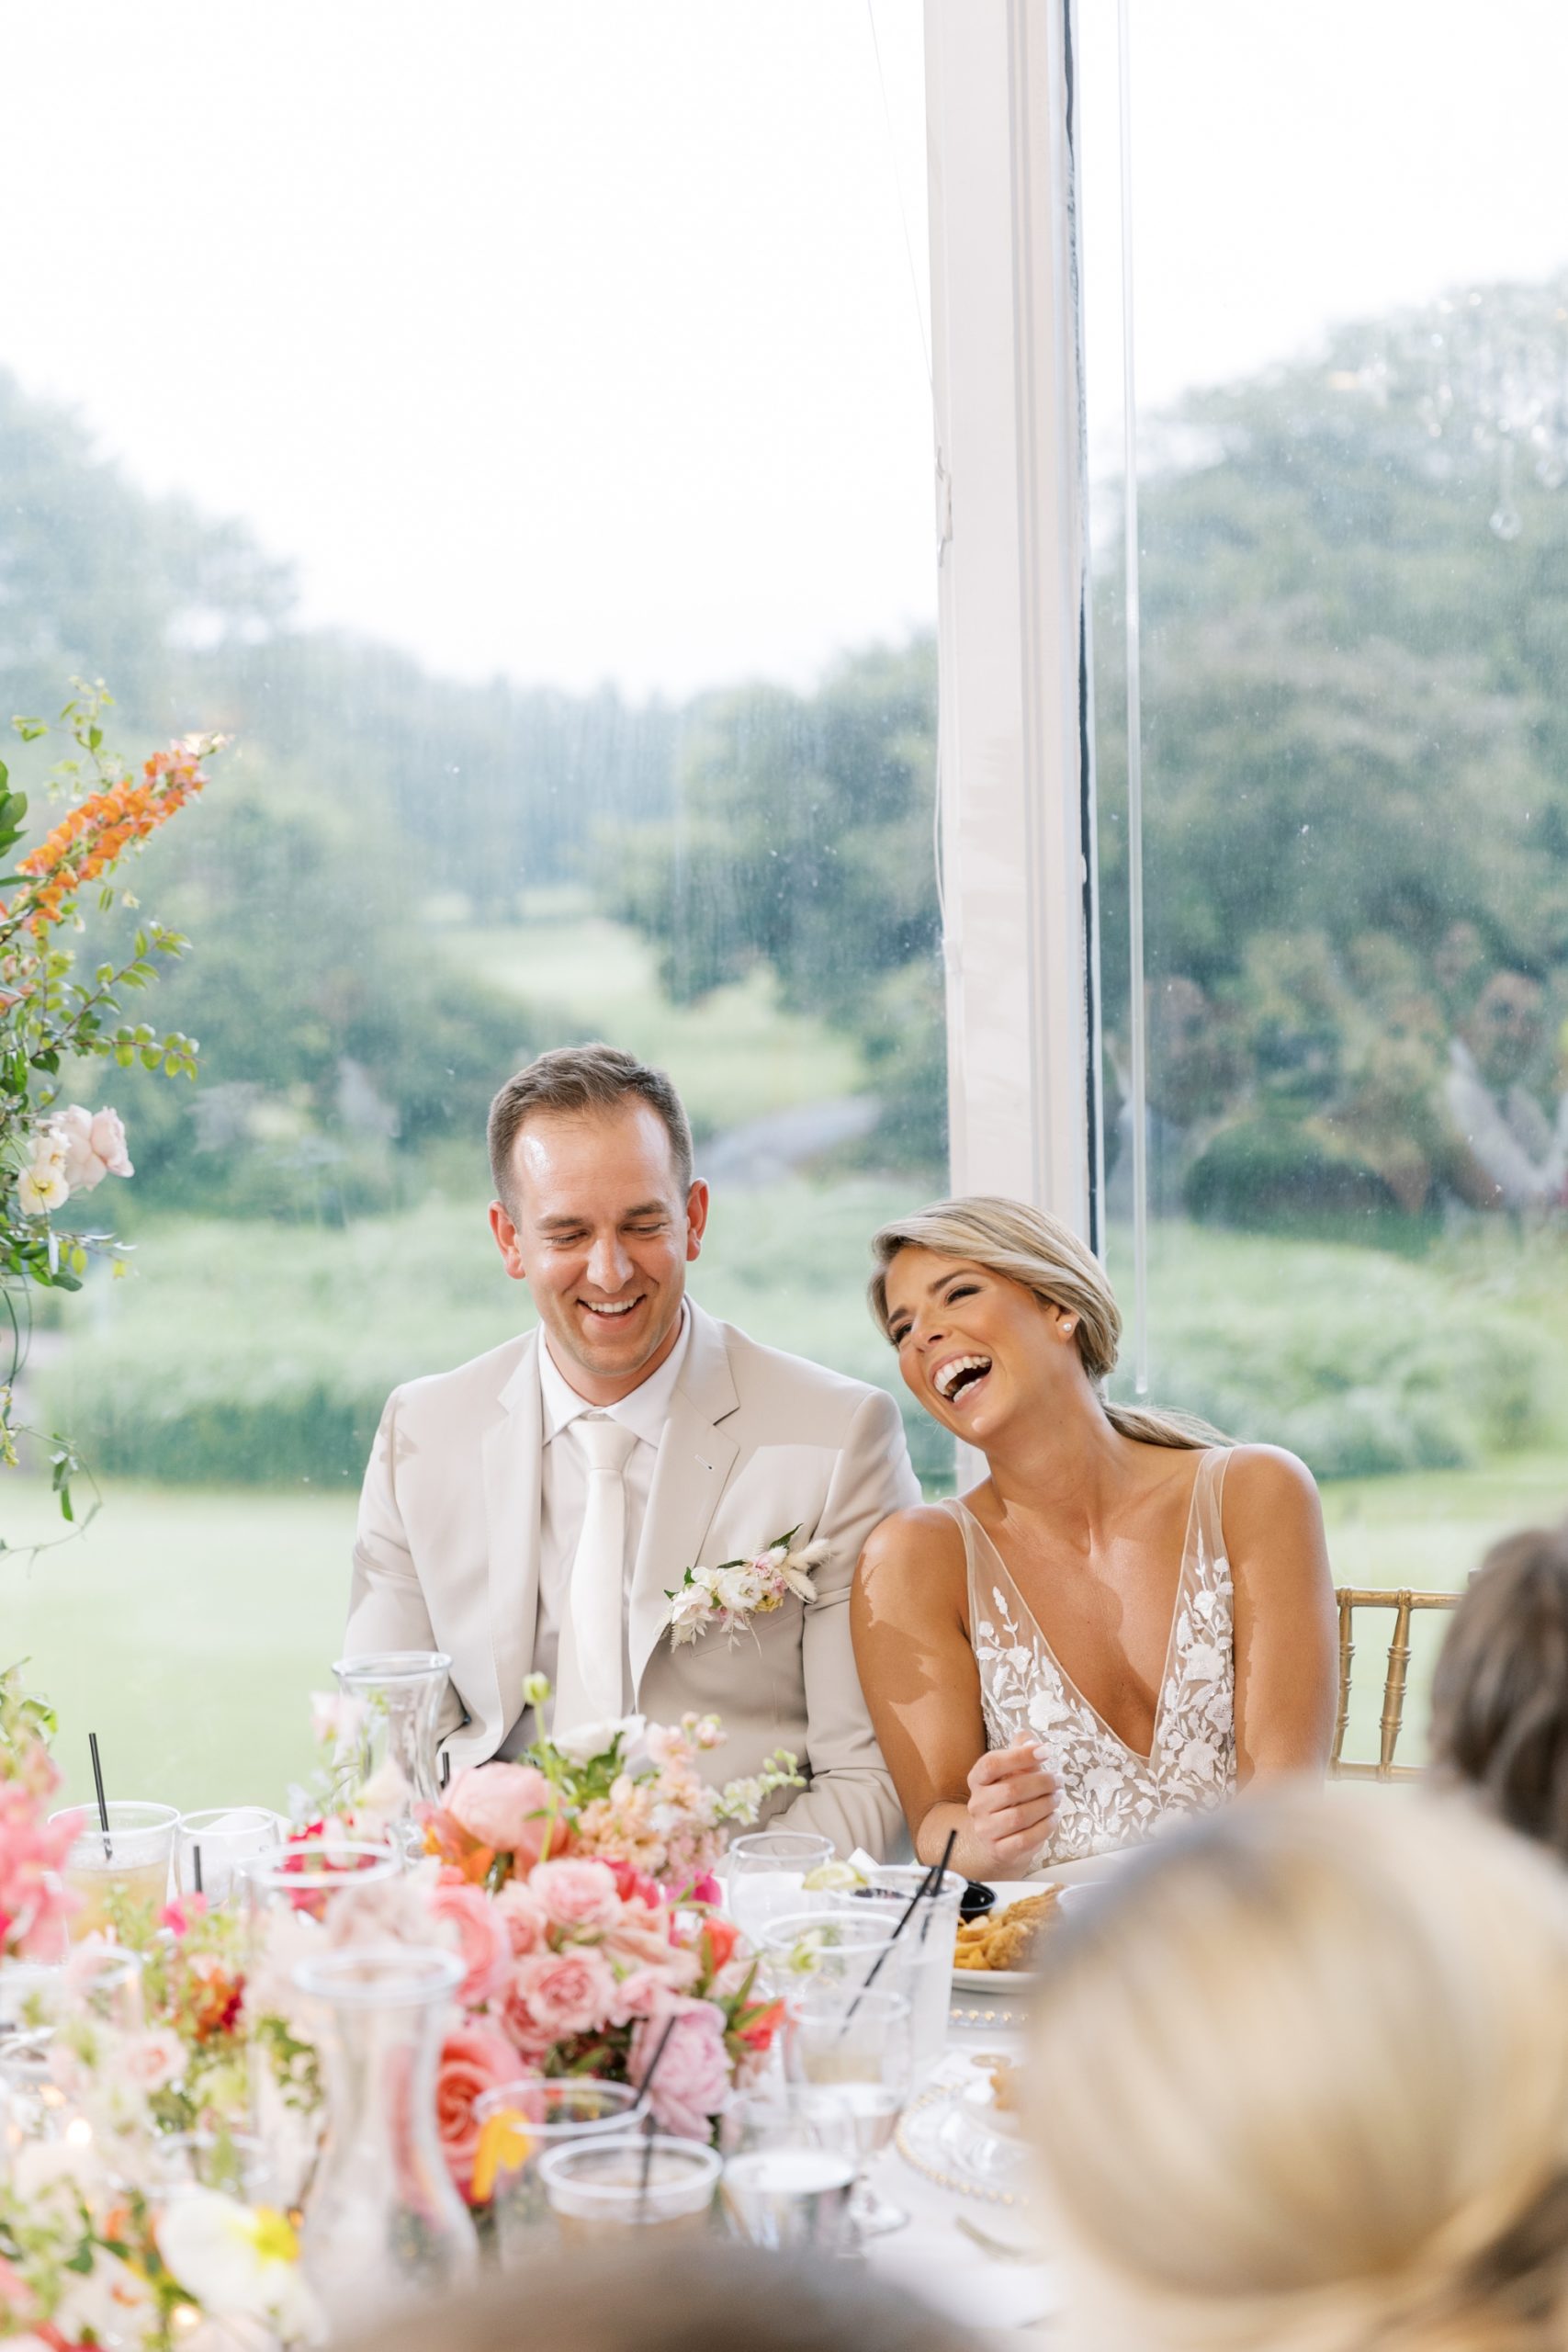 Bride and groom laughed during their reception at their Lake Windsor Country Club wedding